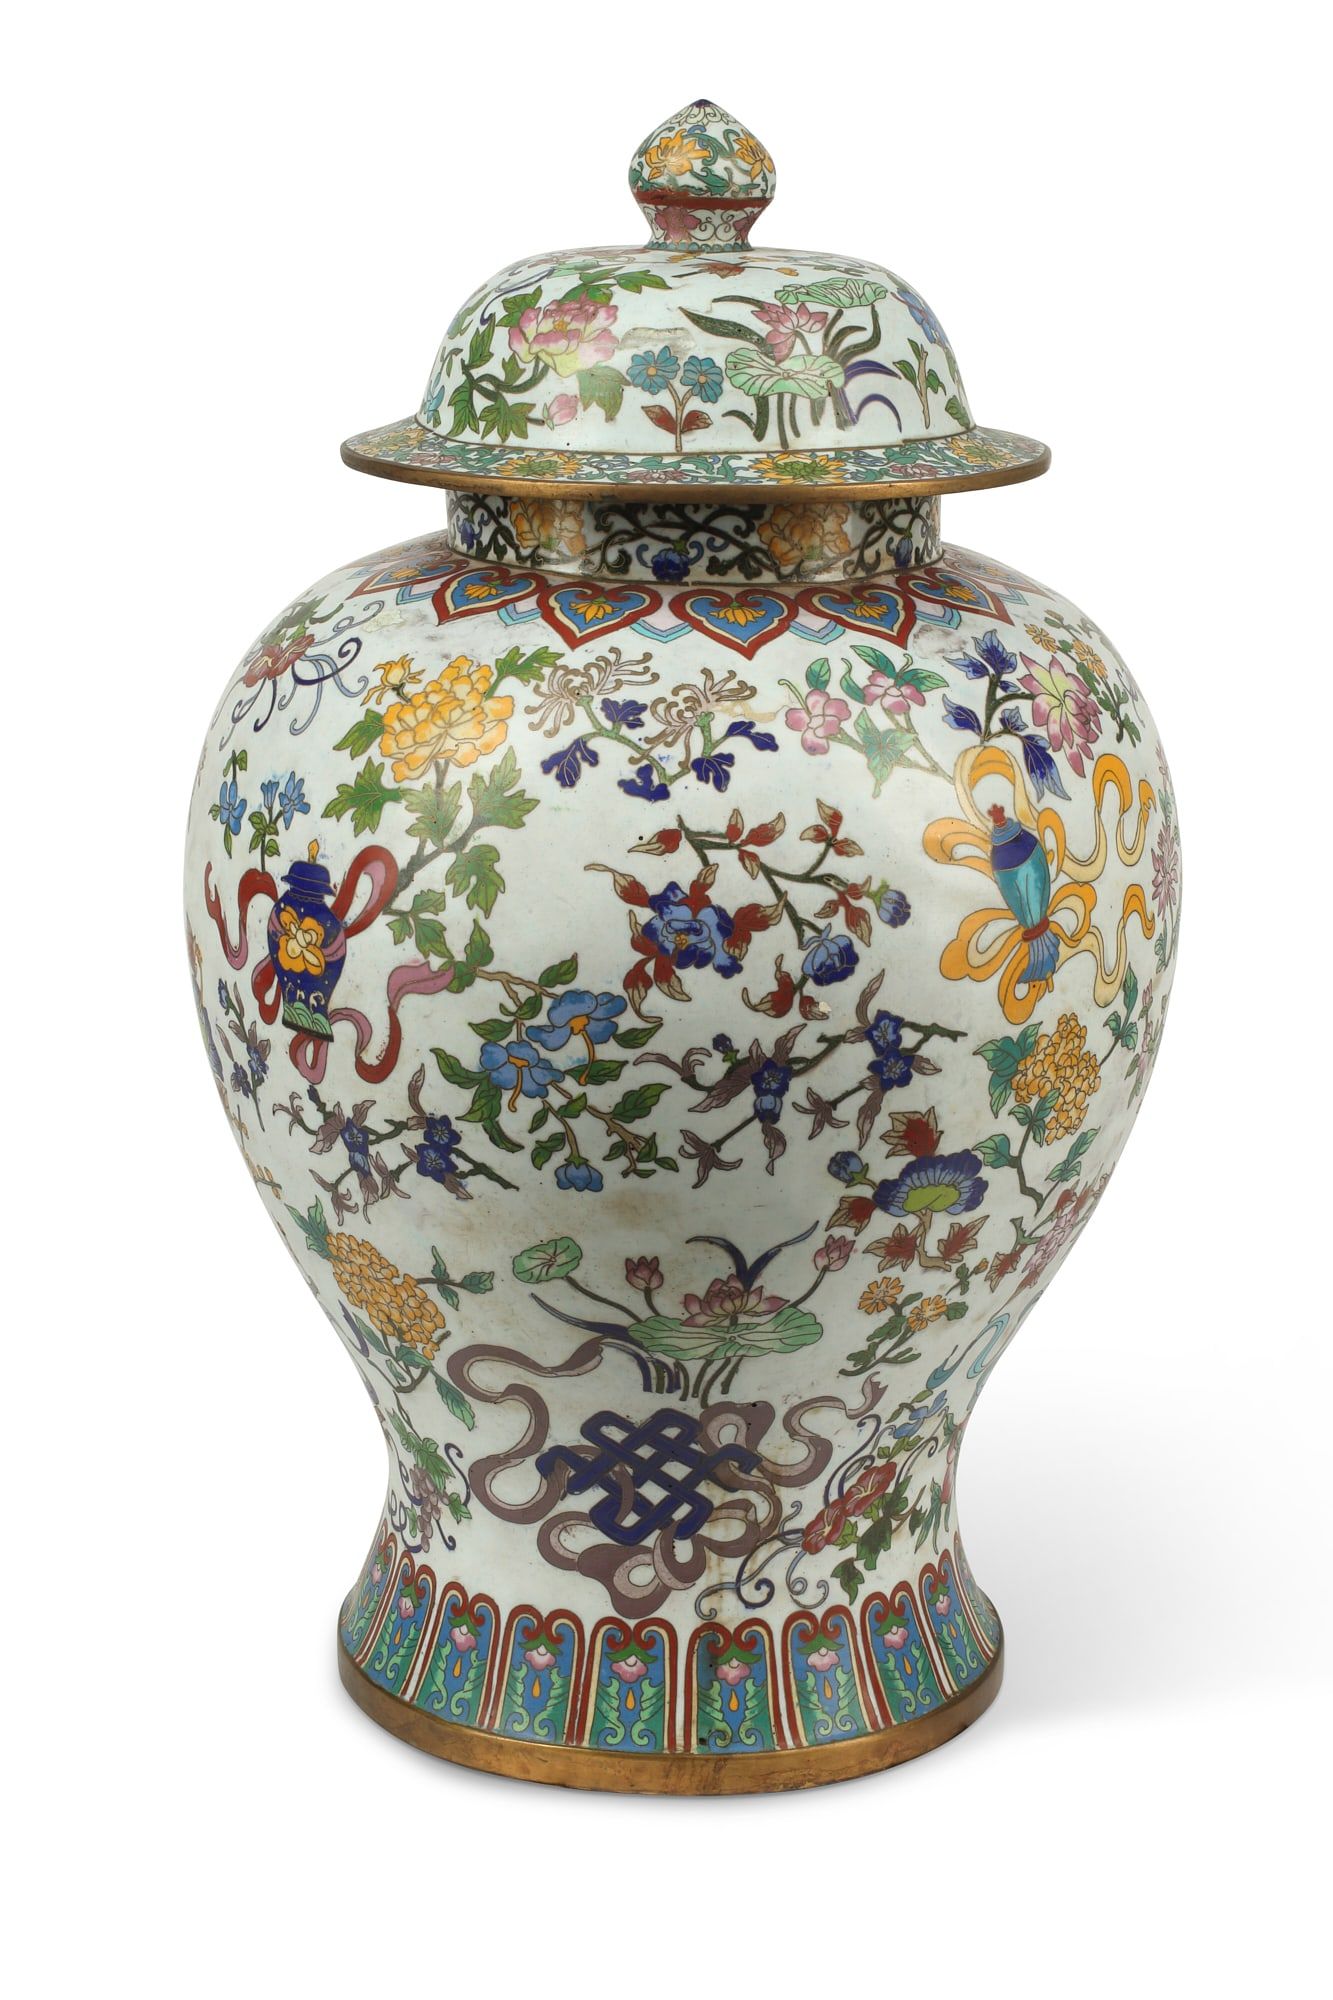 A LARGE CHINESE CLOISONNE COVERED